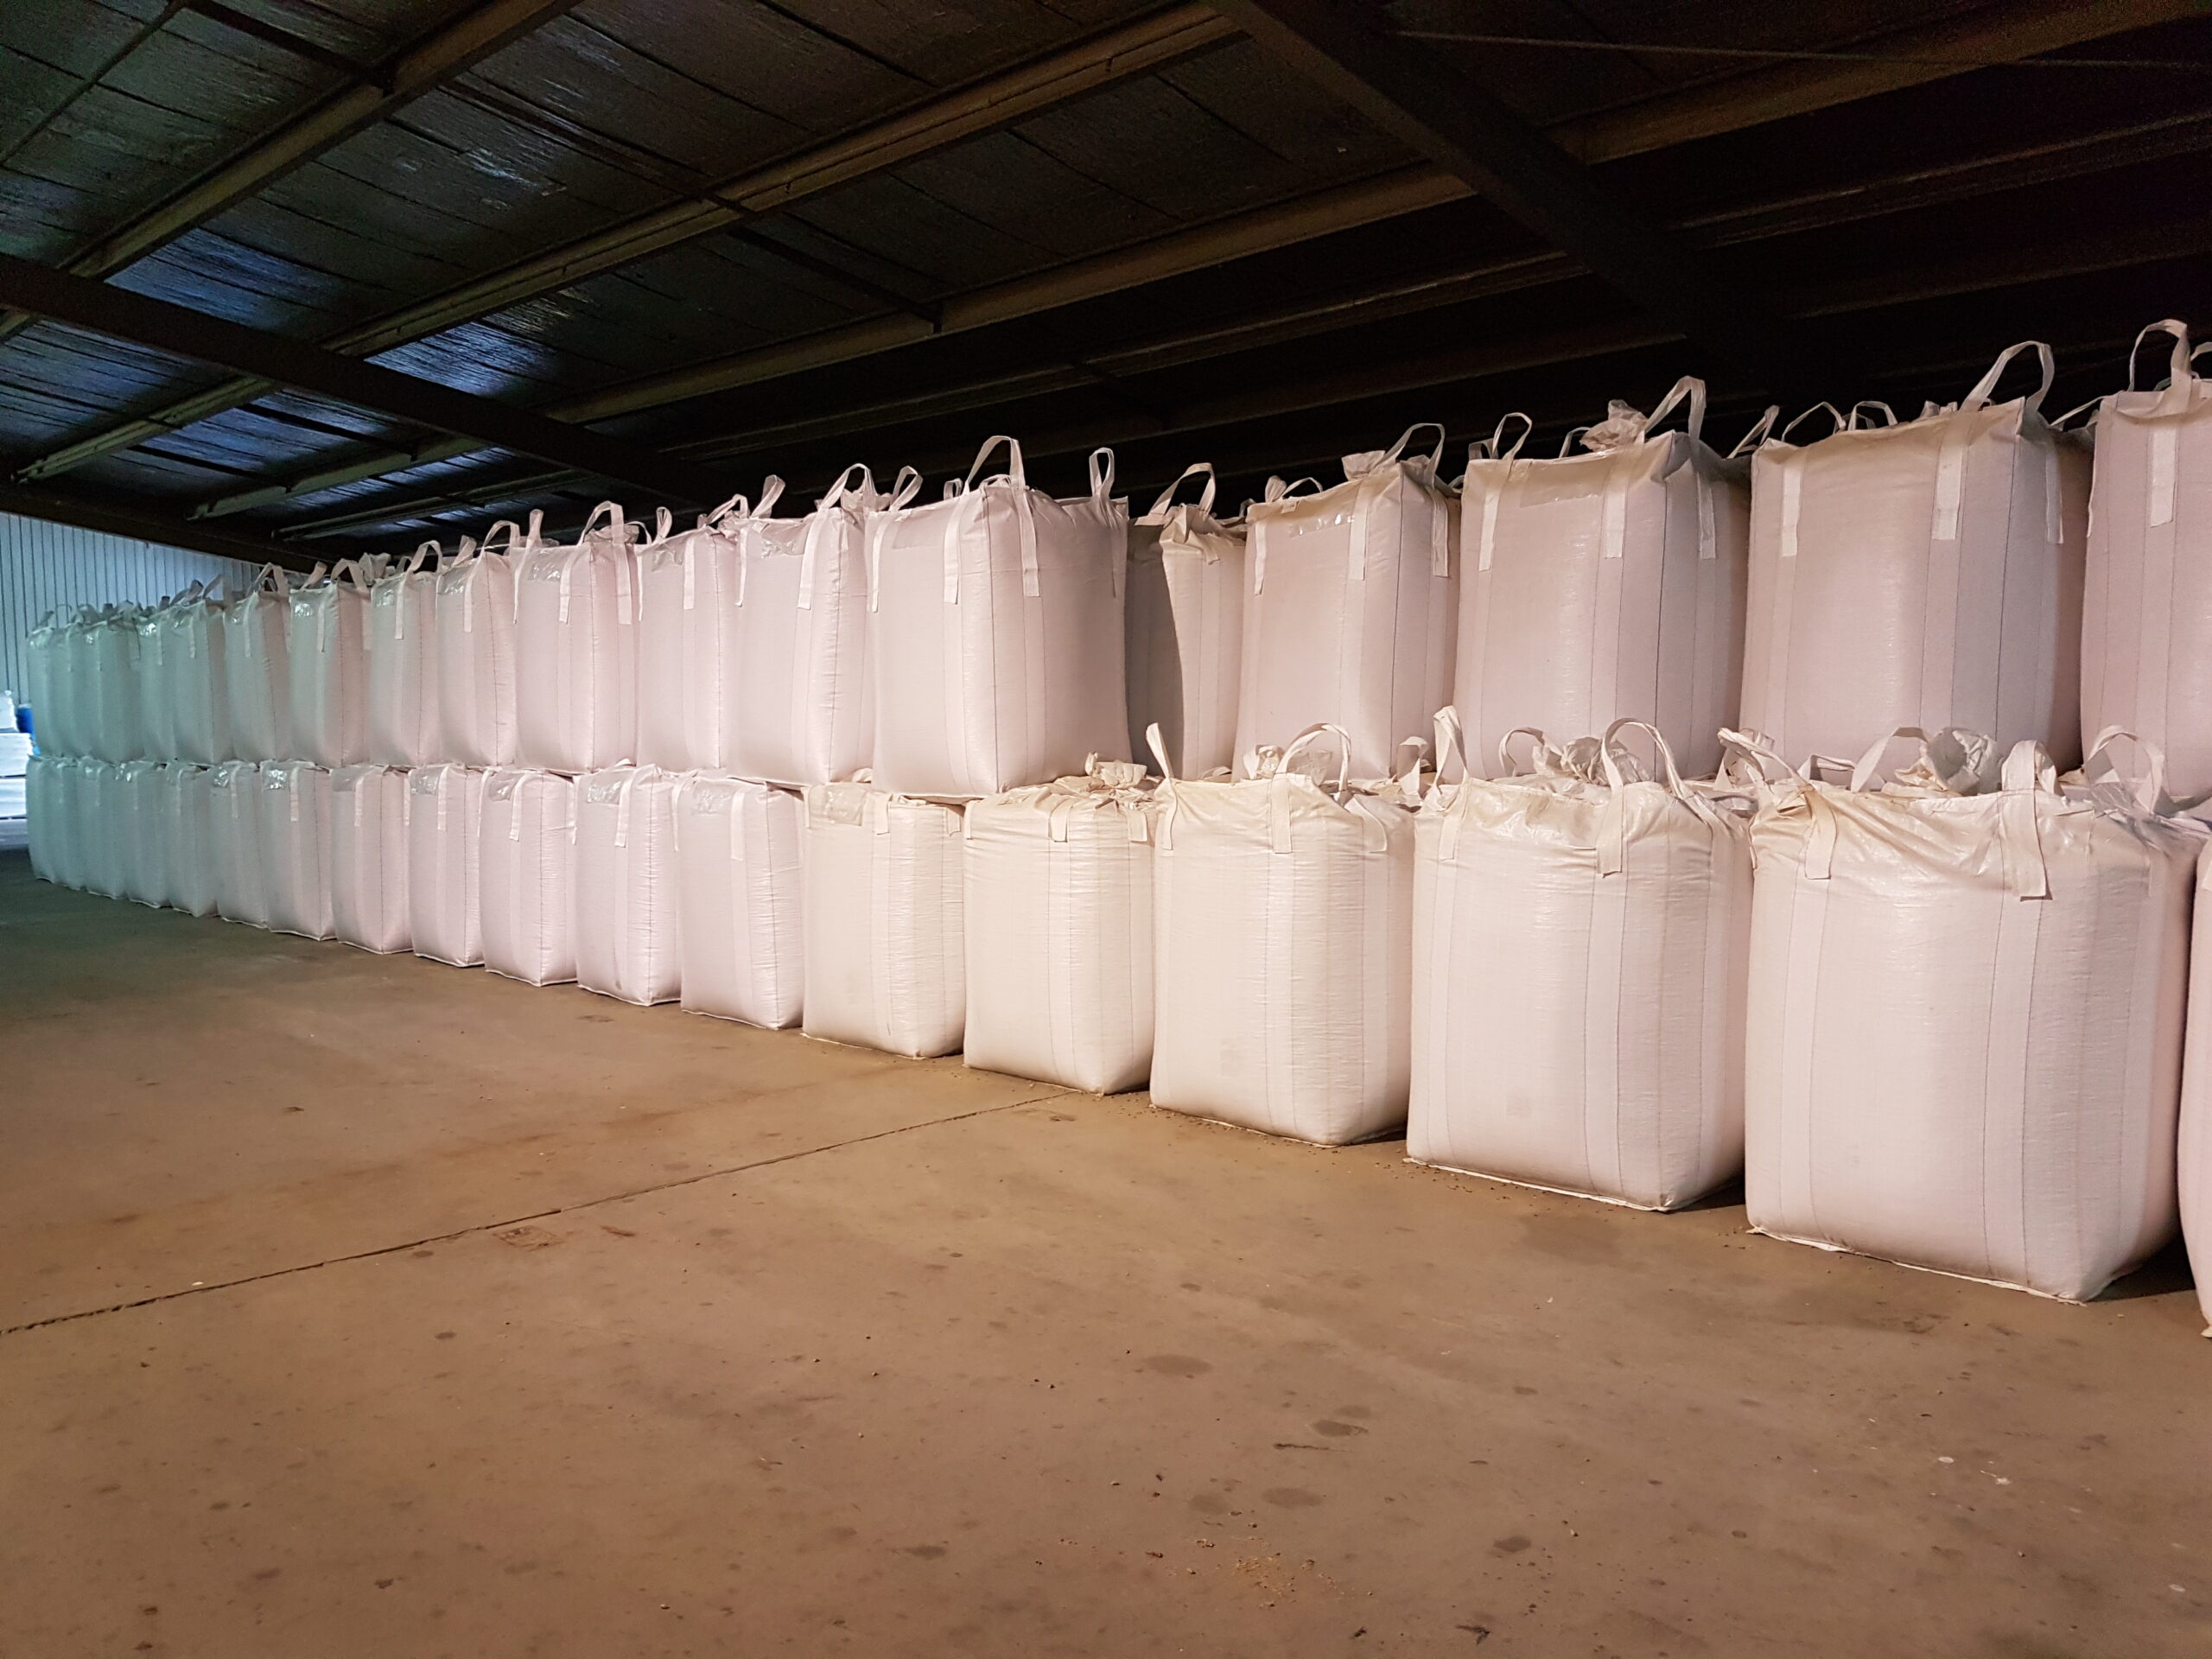 Demolition Bulk Bags stacked up in a warehouse